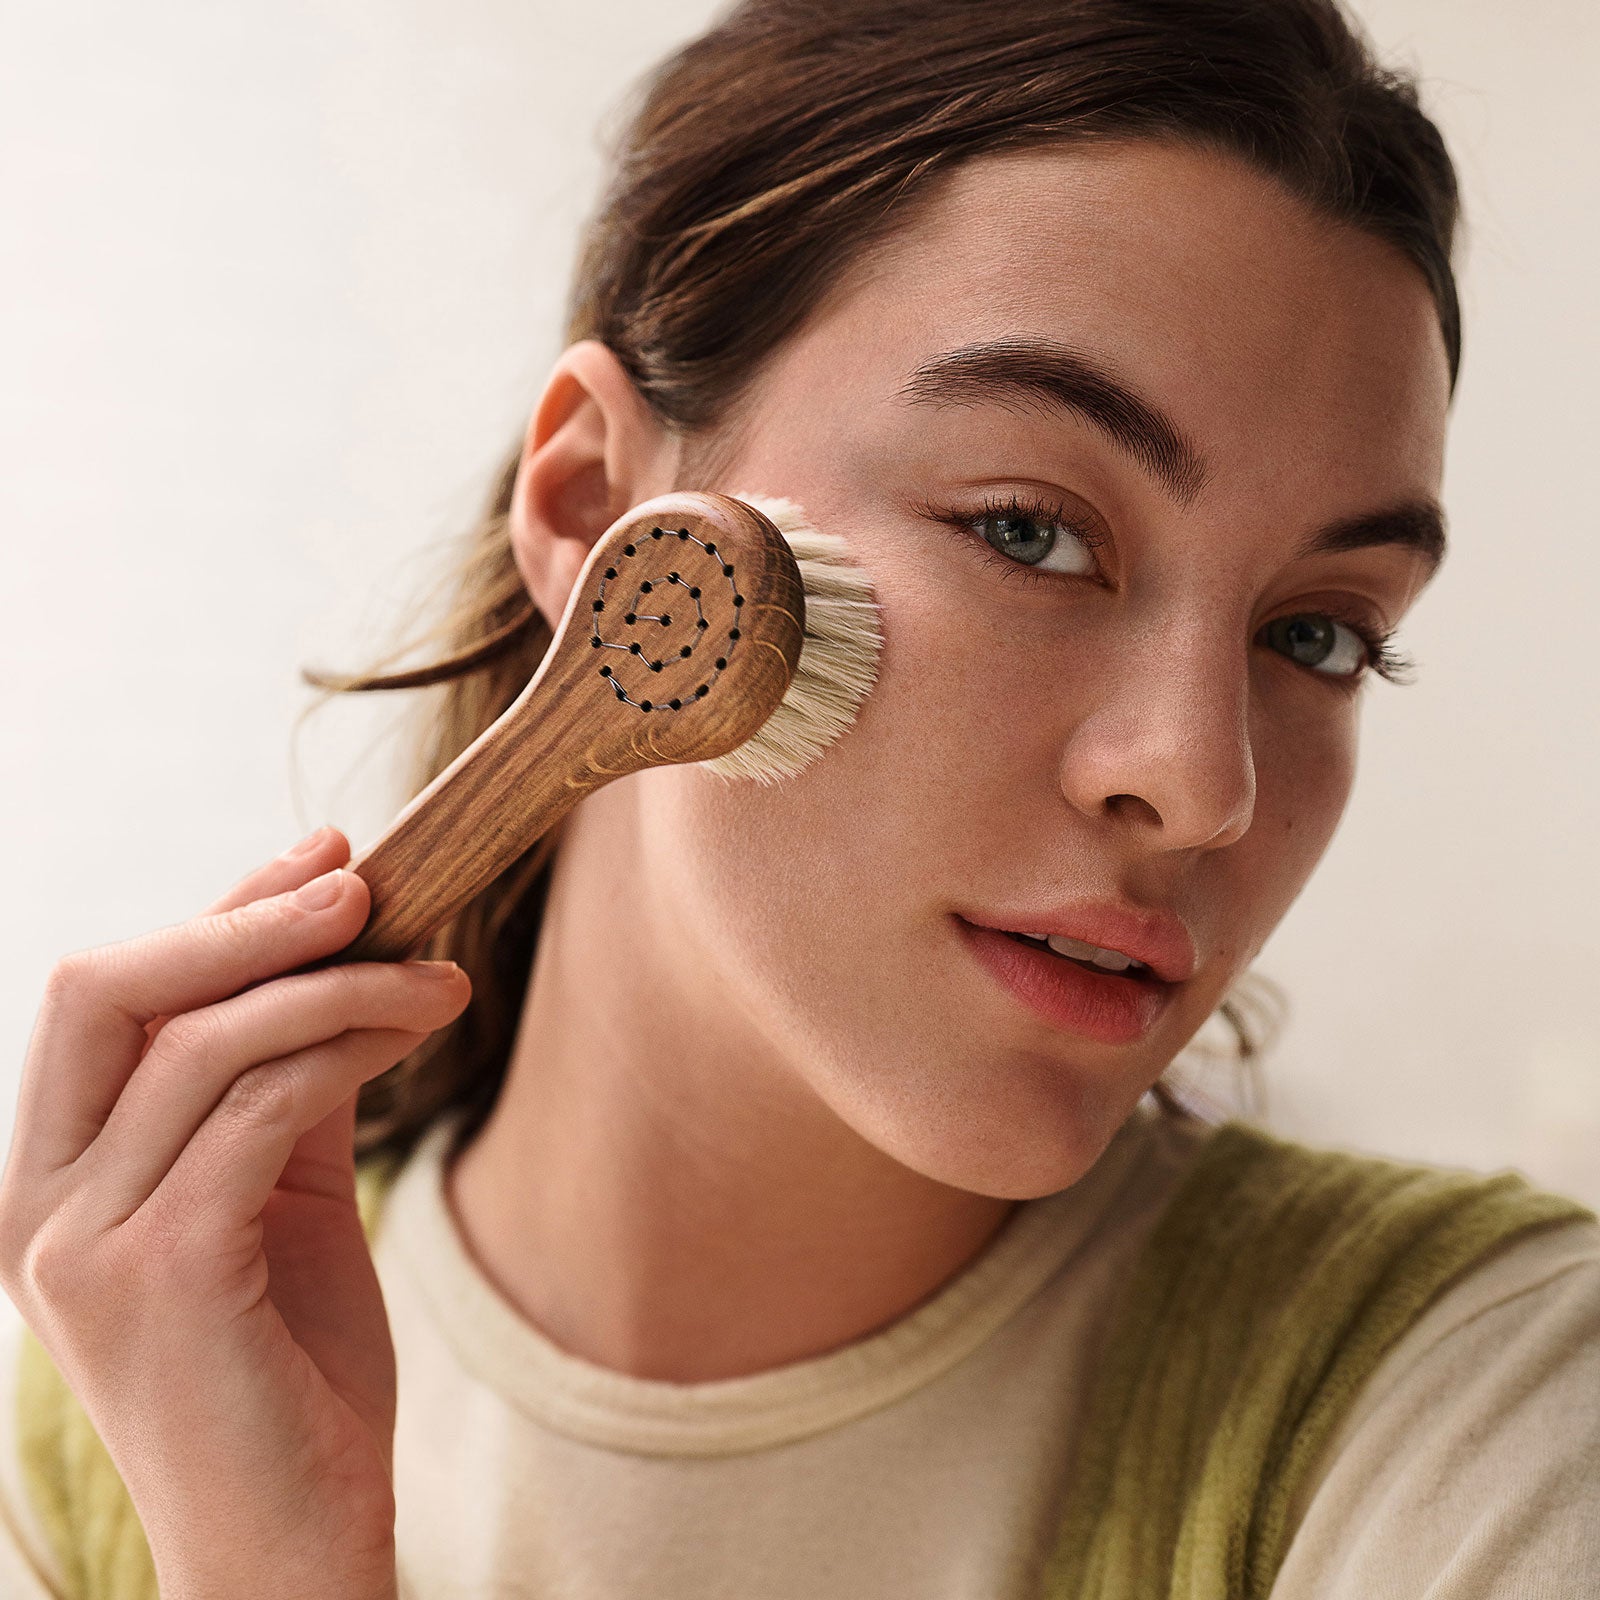 How to use our Daily Glow Facial Dry Brush